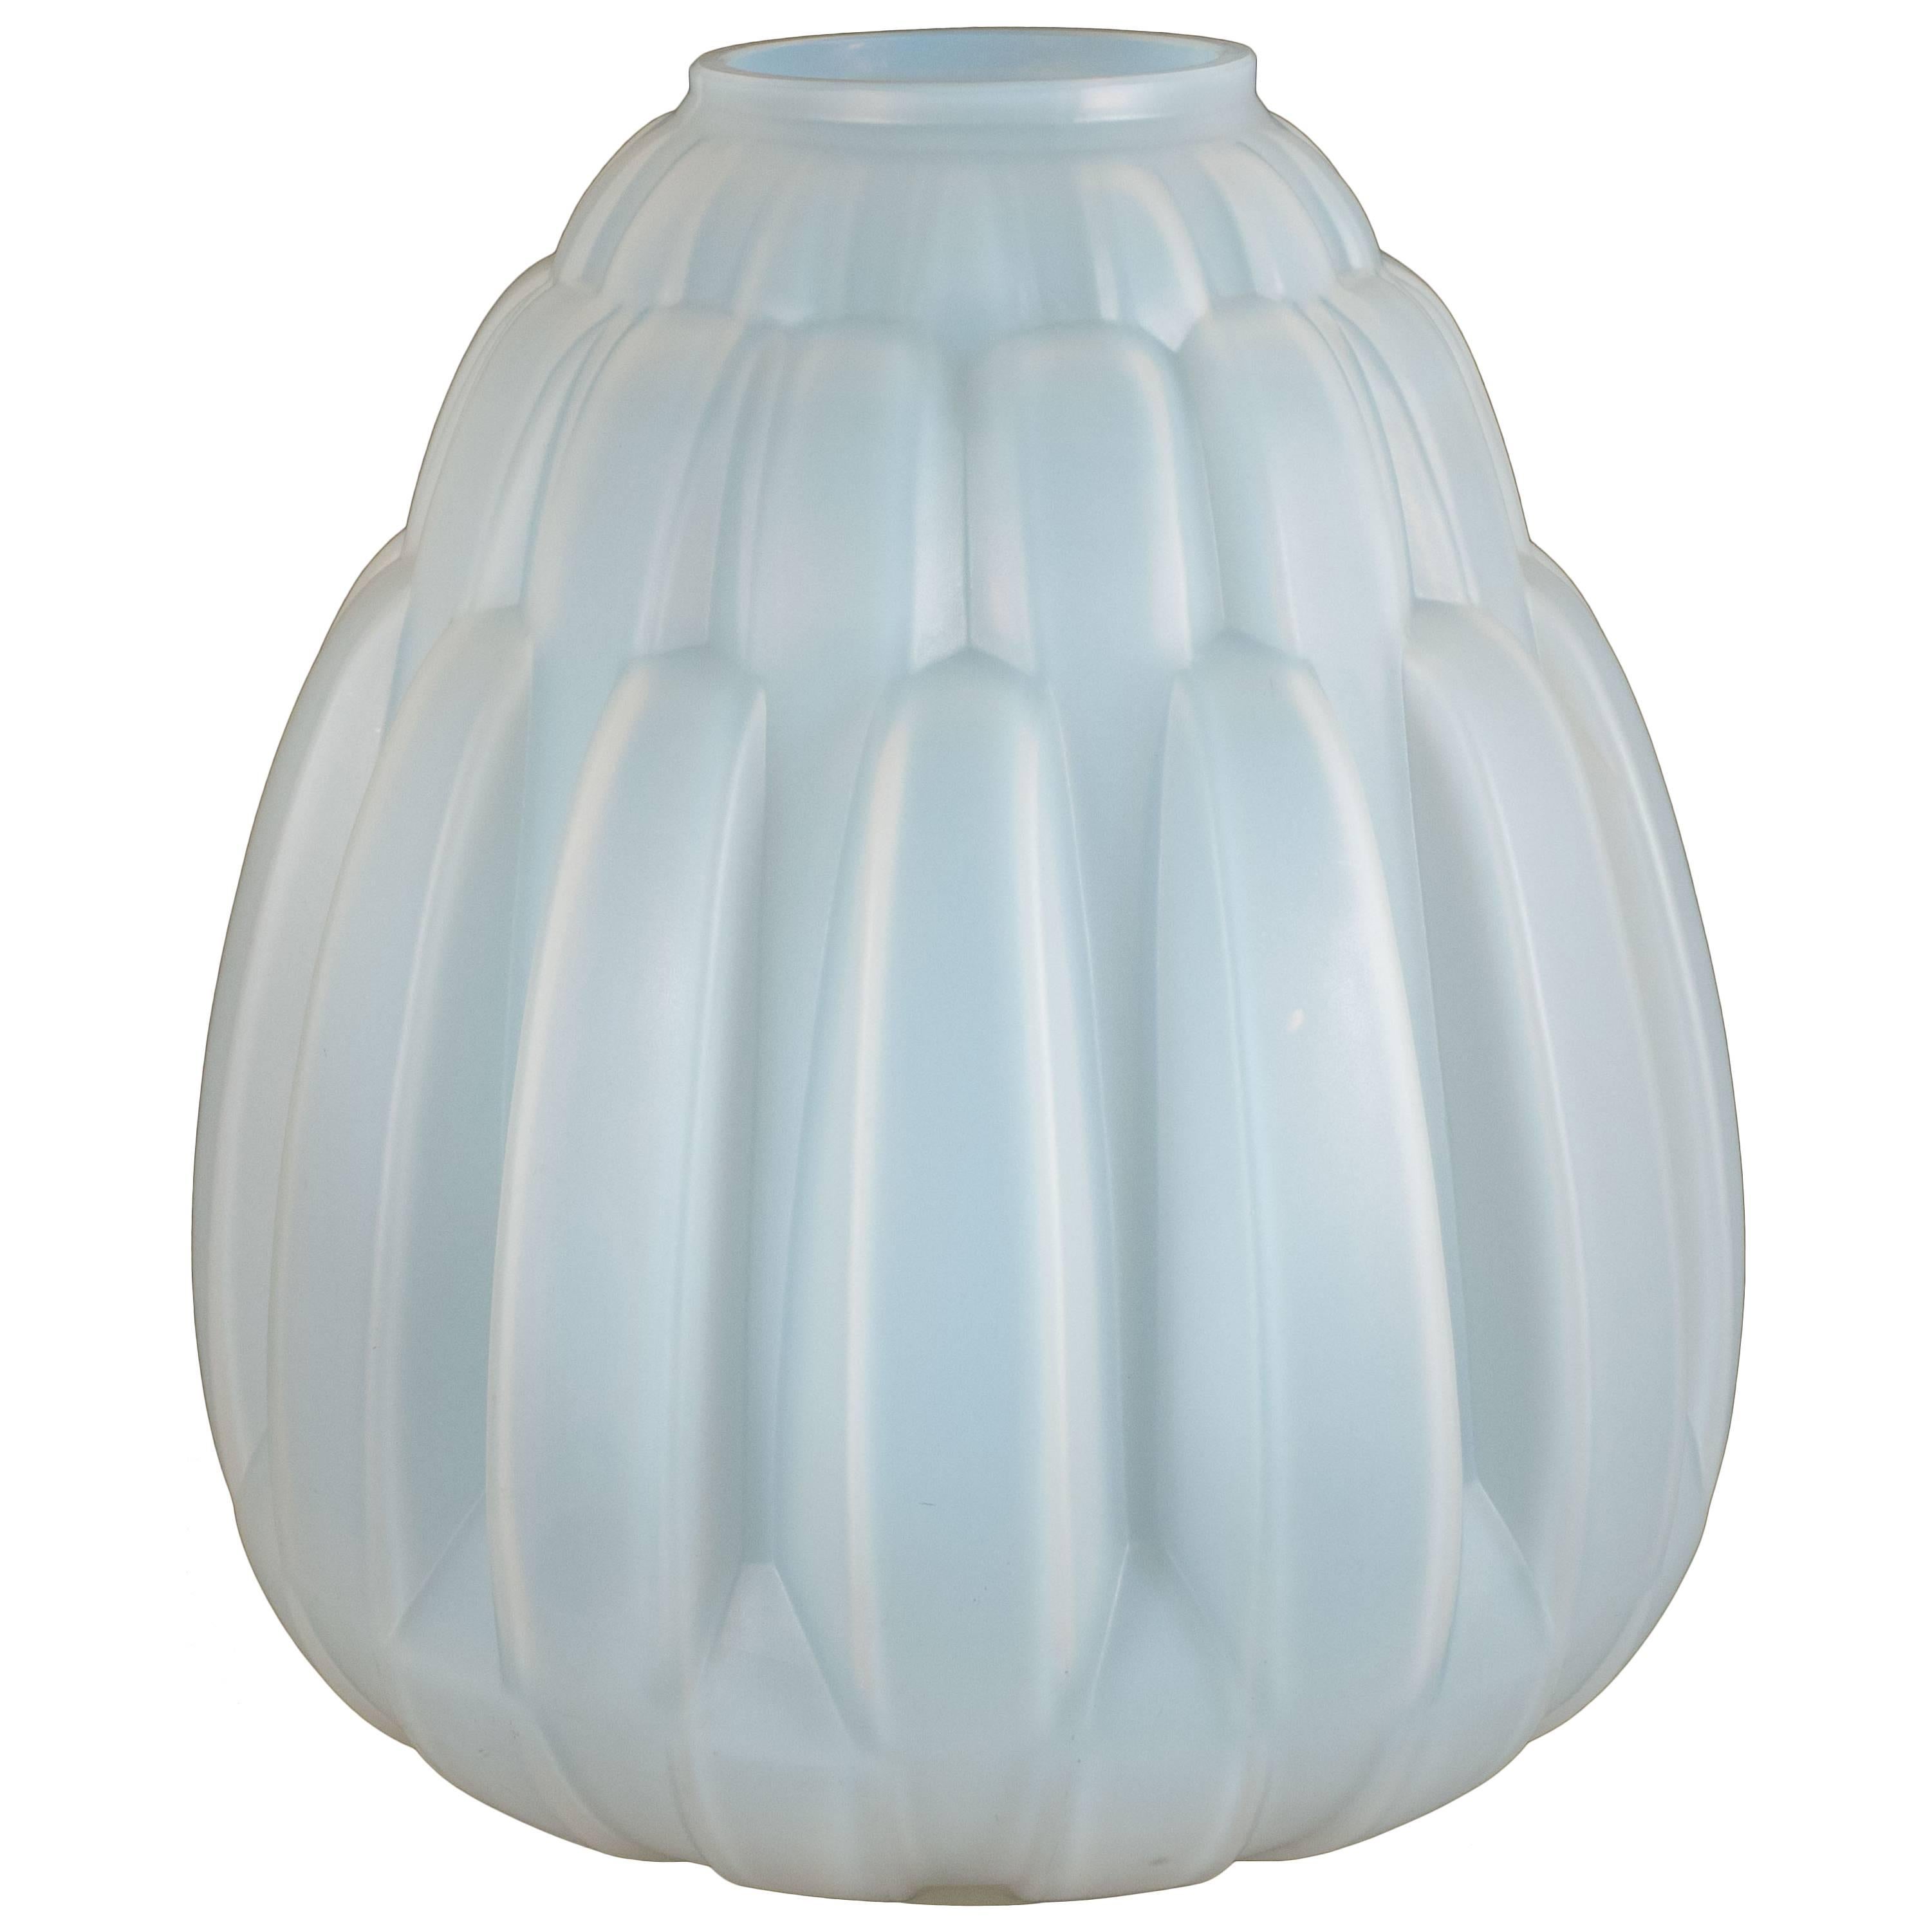 French Art Deco Opalescent Glass Vase with Streamlined Bands by Andre Hunebelle